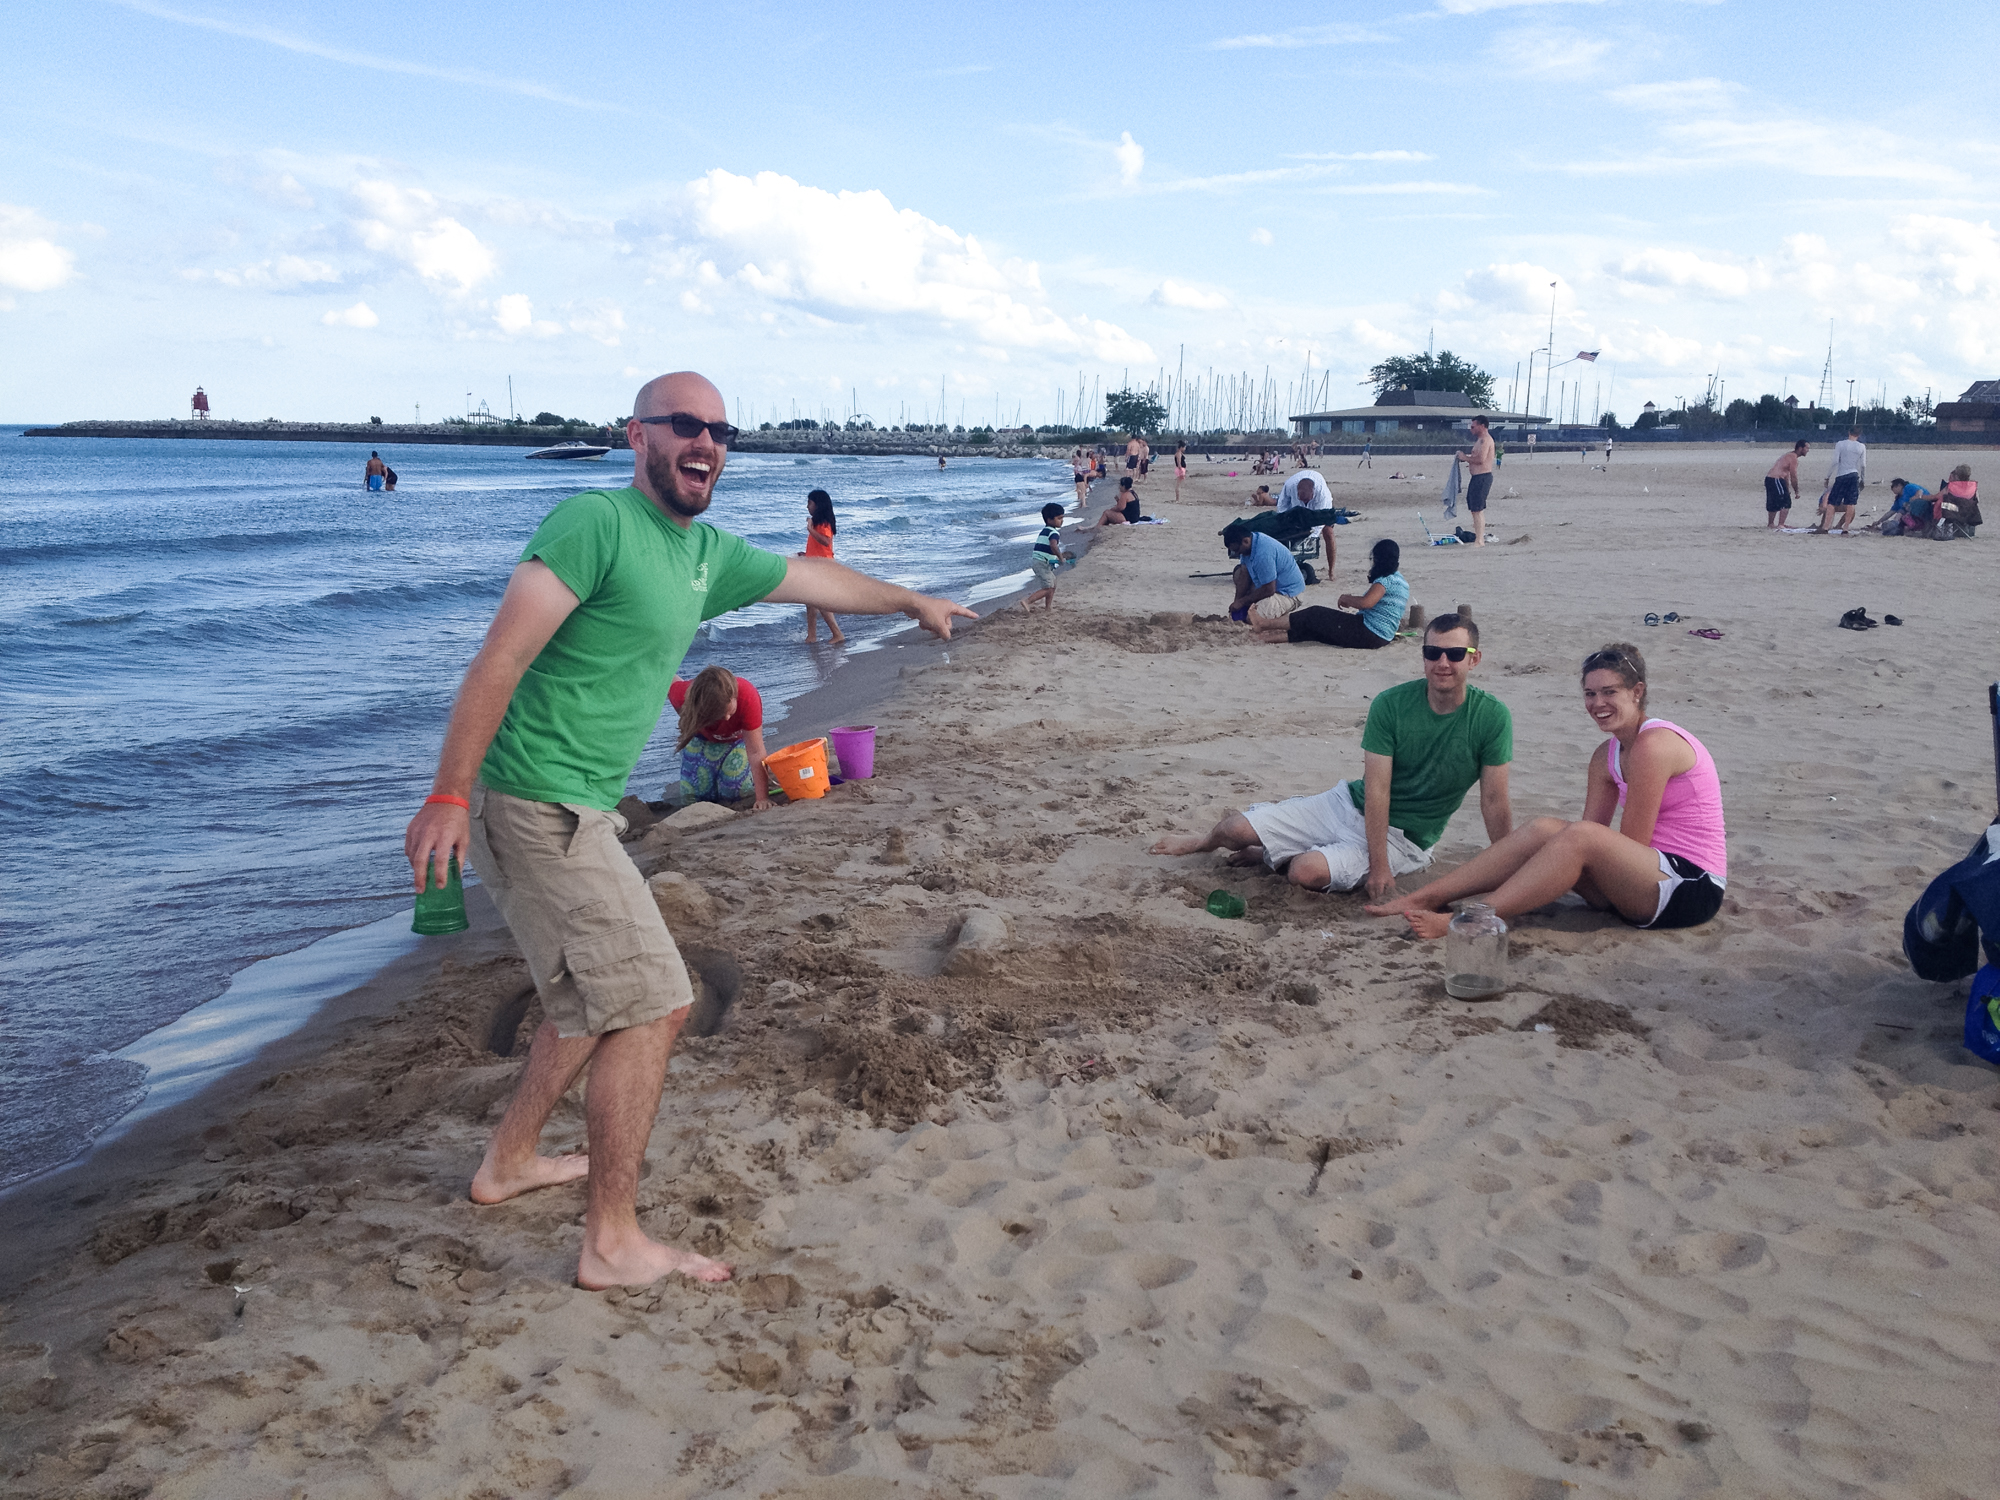  An impromptu beach day at North Beach in Racine over Labor Day weekend was perfect: bocce ball, sand castles and picnic food with silly friends. 